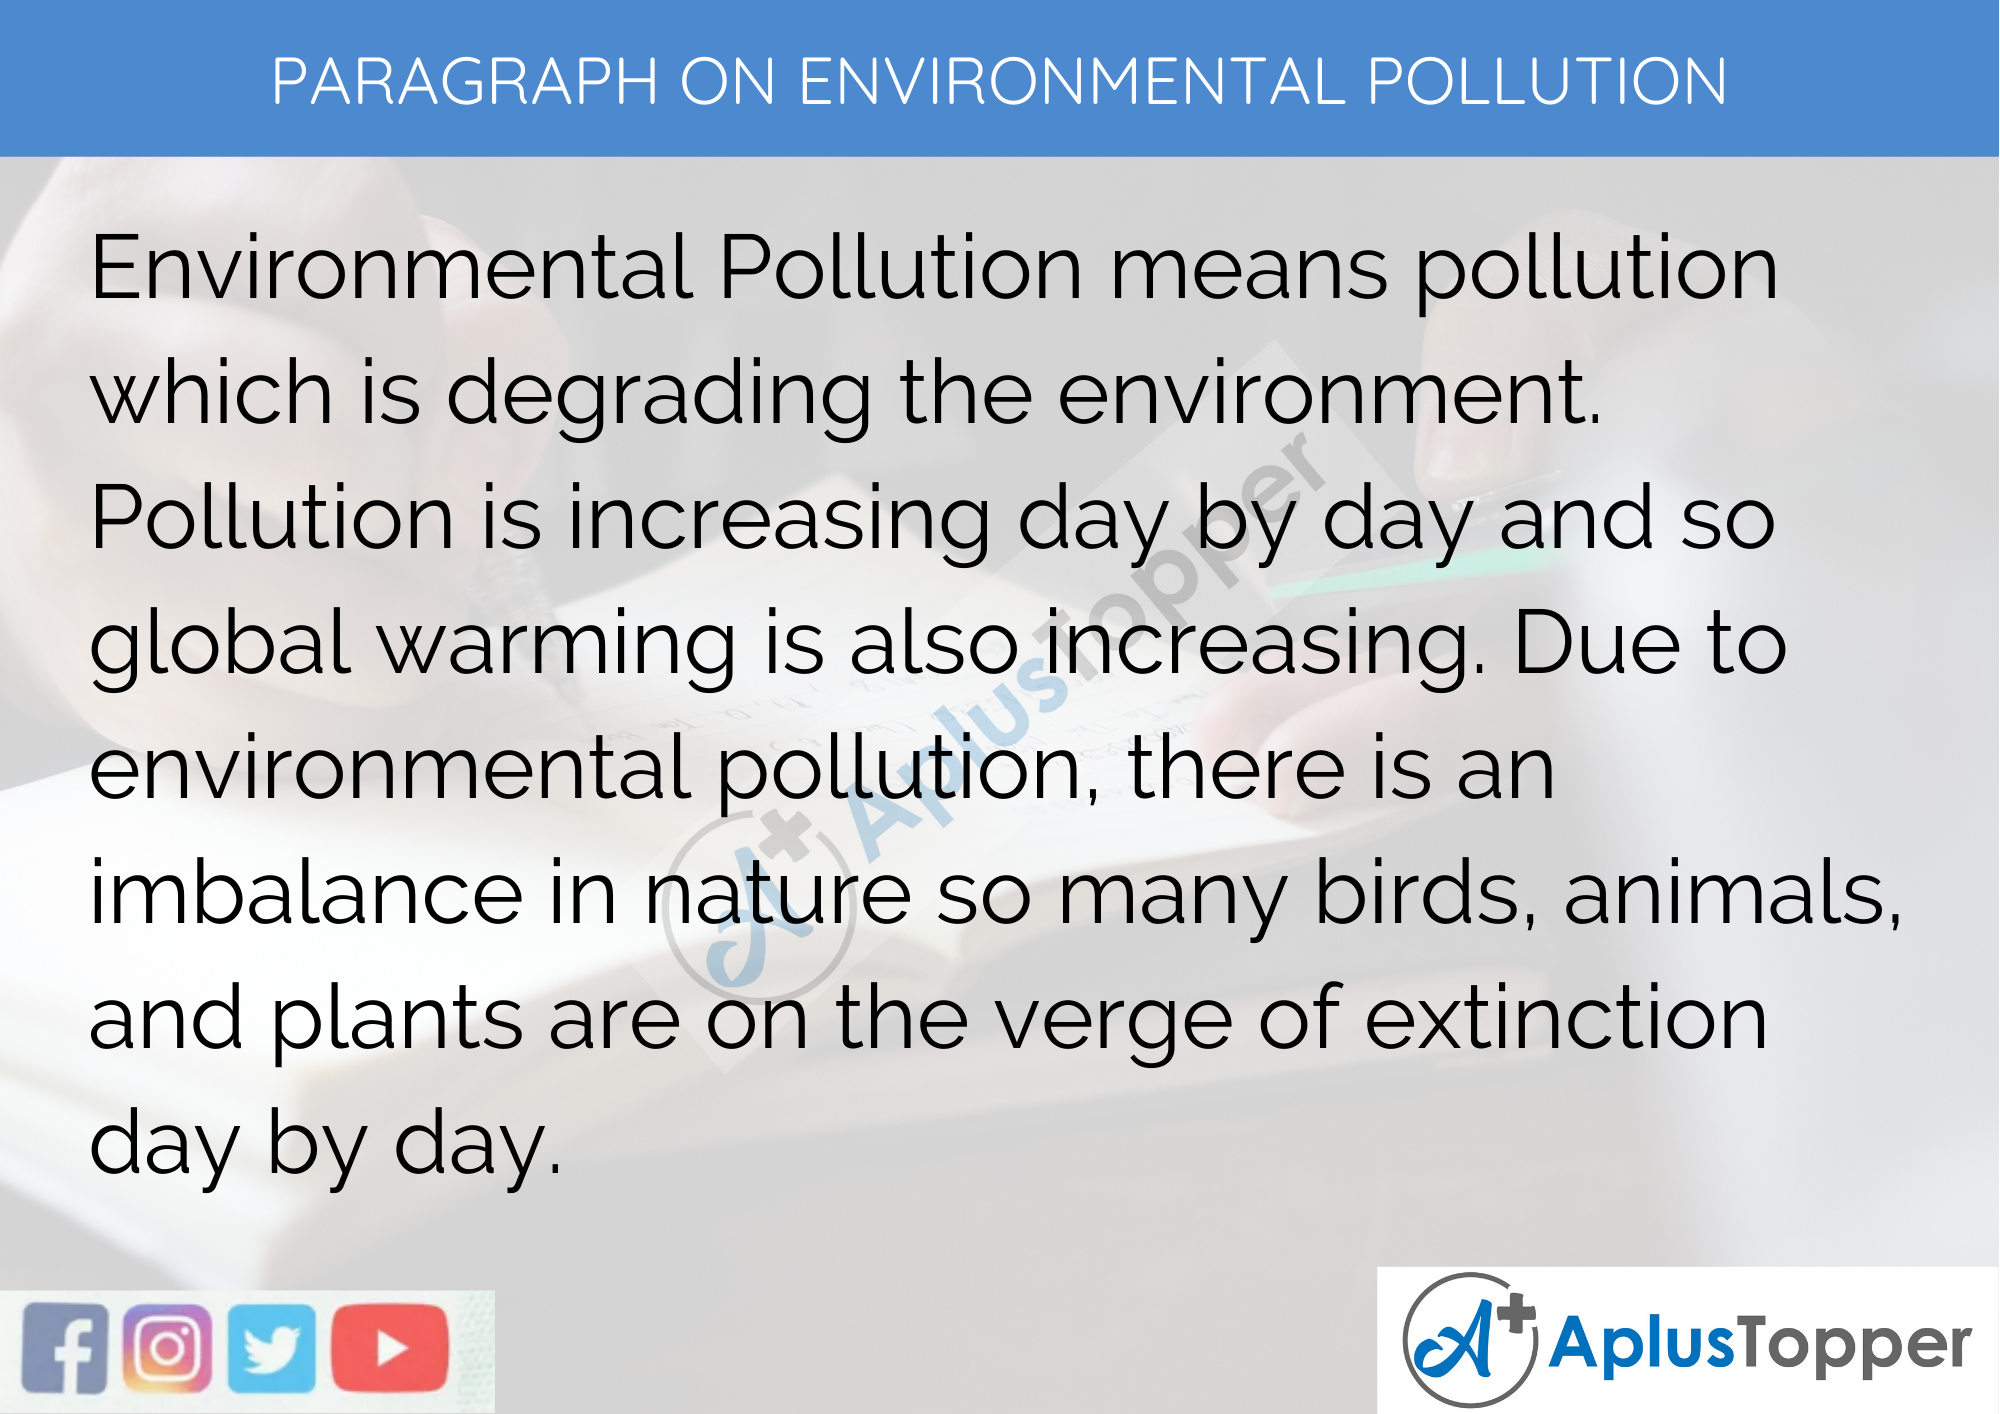 Paragraph on Environmental Pollution - 100 Words for Classes 1, 2, and 3 Kids